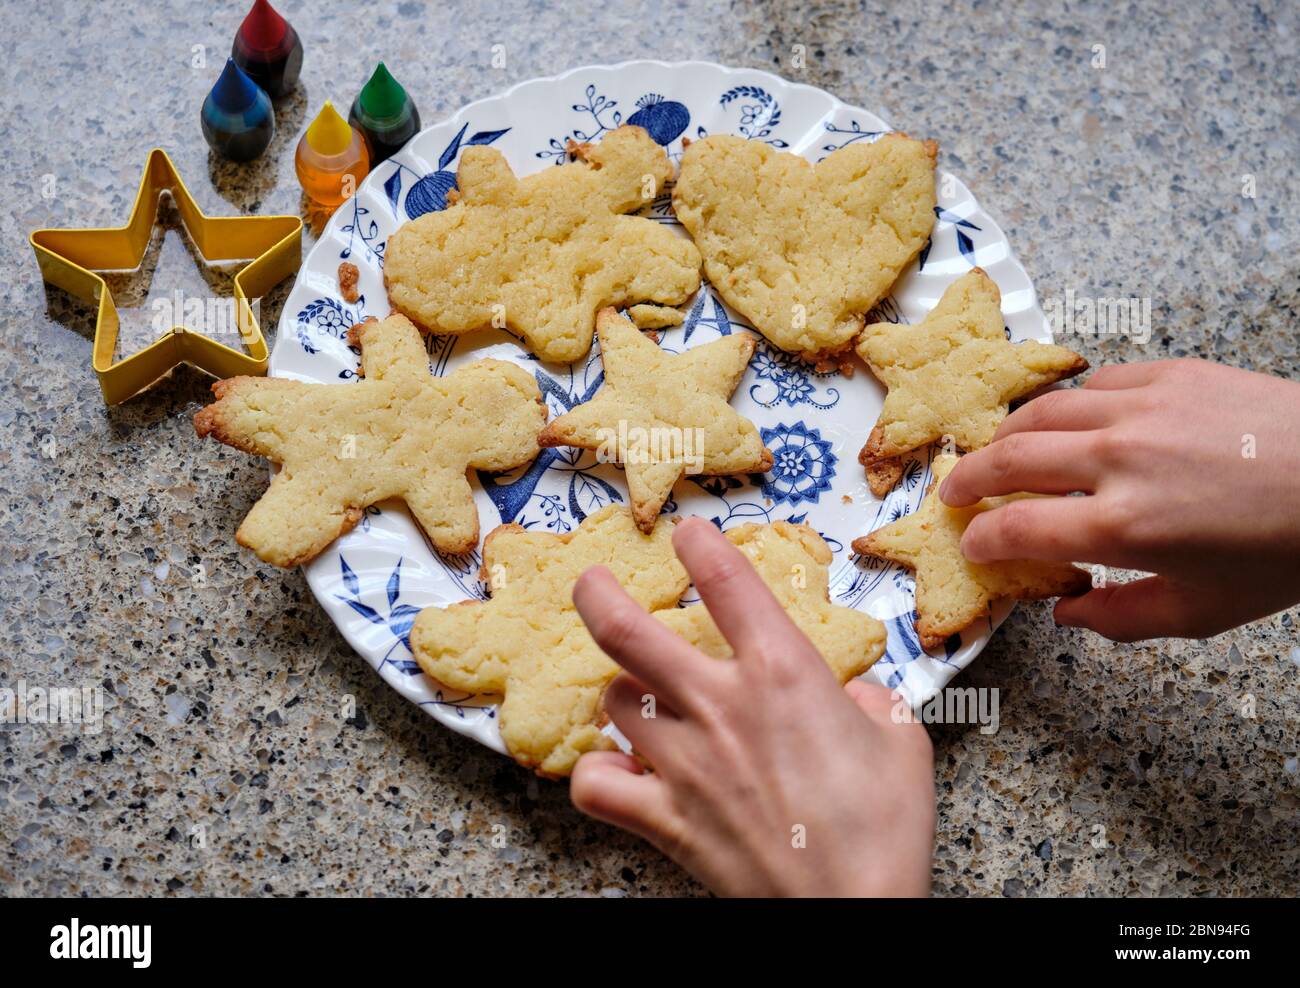 Hands of young boy organising the butter cookies he baked as project during  lock-down Stock Photo